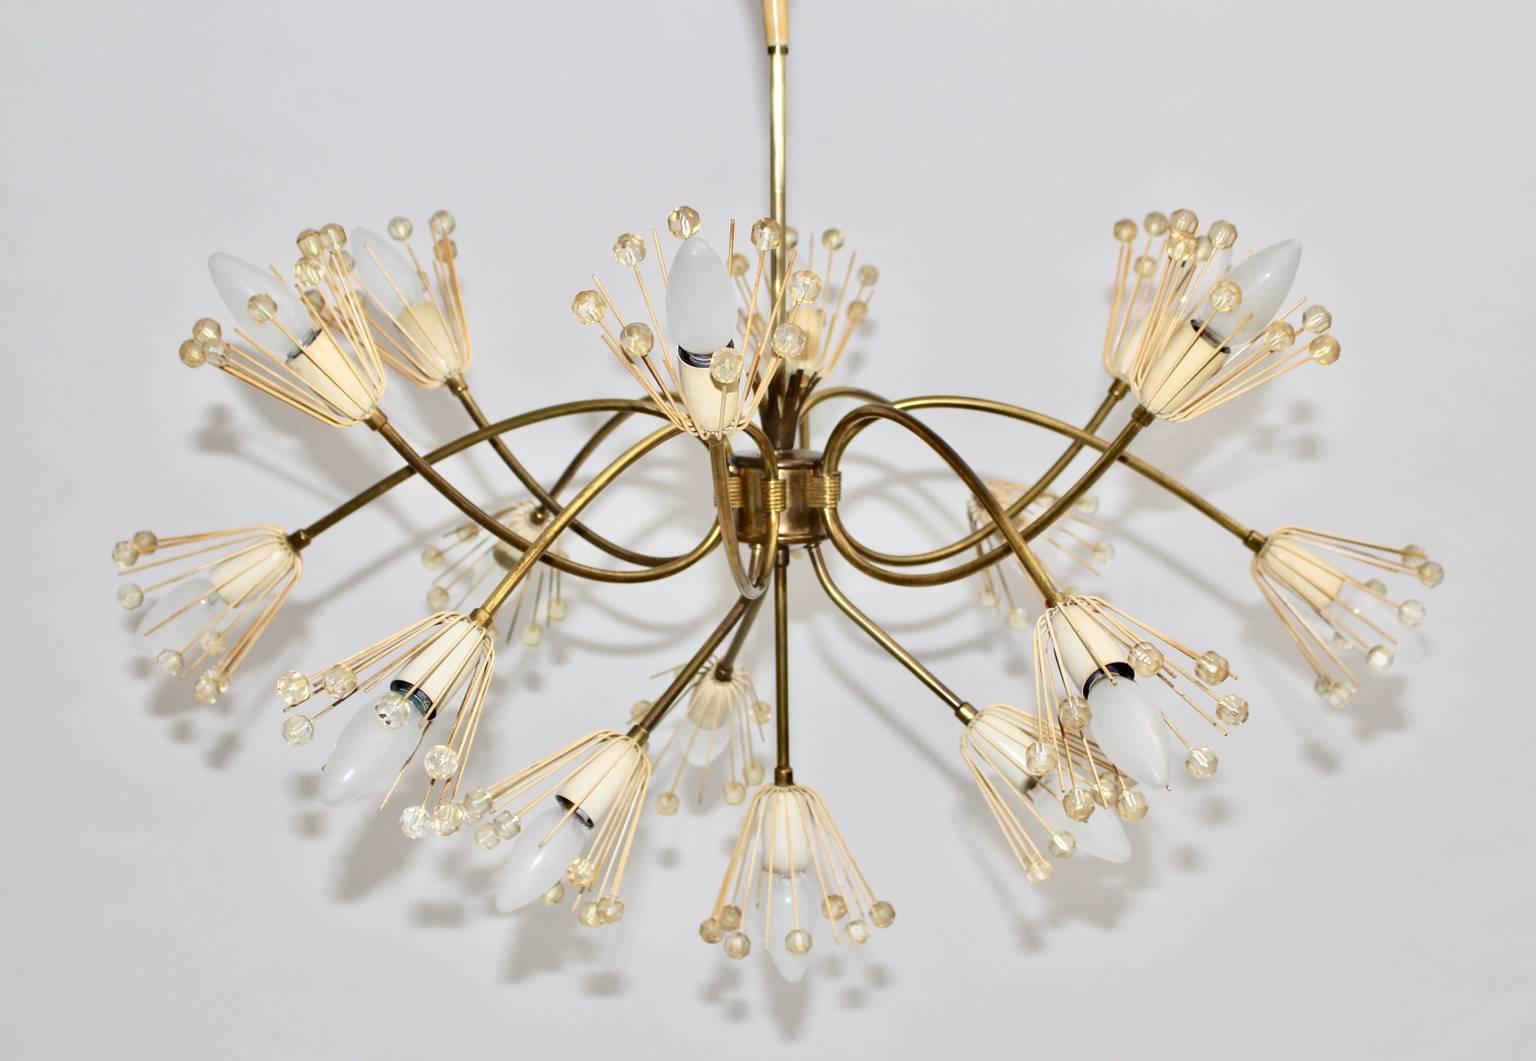 The mid century modern brass vintage chandelier or pendant, which is shaped like a snowflake, was designed by Emil Stejnar 1955 Vienna and manufactured by Rupert Nikoll Vienna, Austria.
The sixteen lights chandelier shows curved brass arms with cut